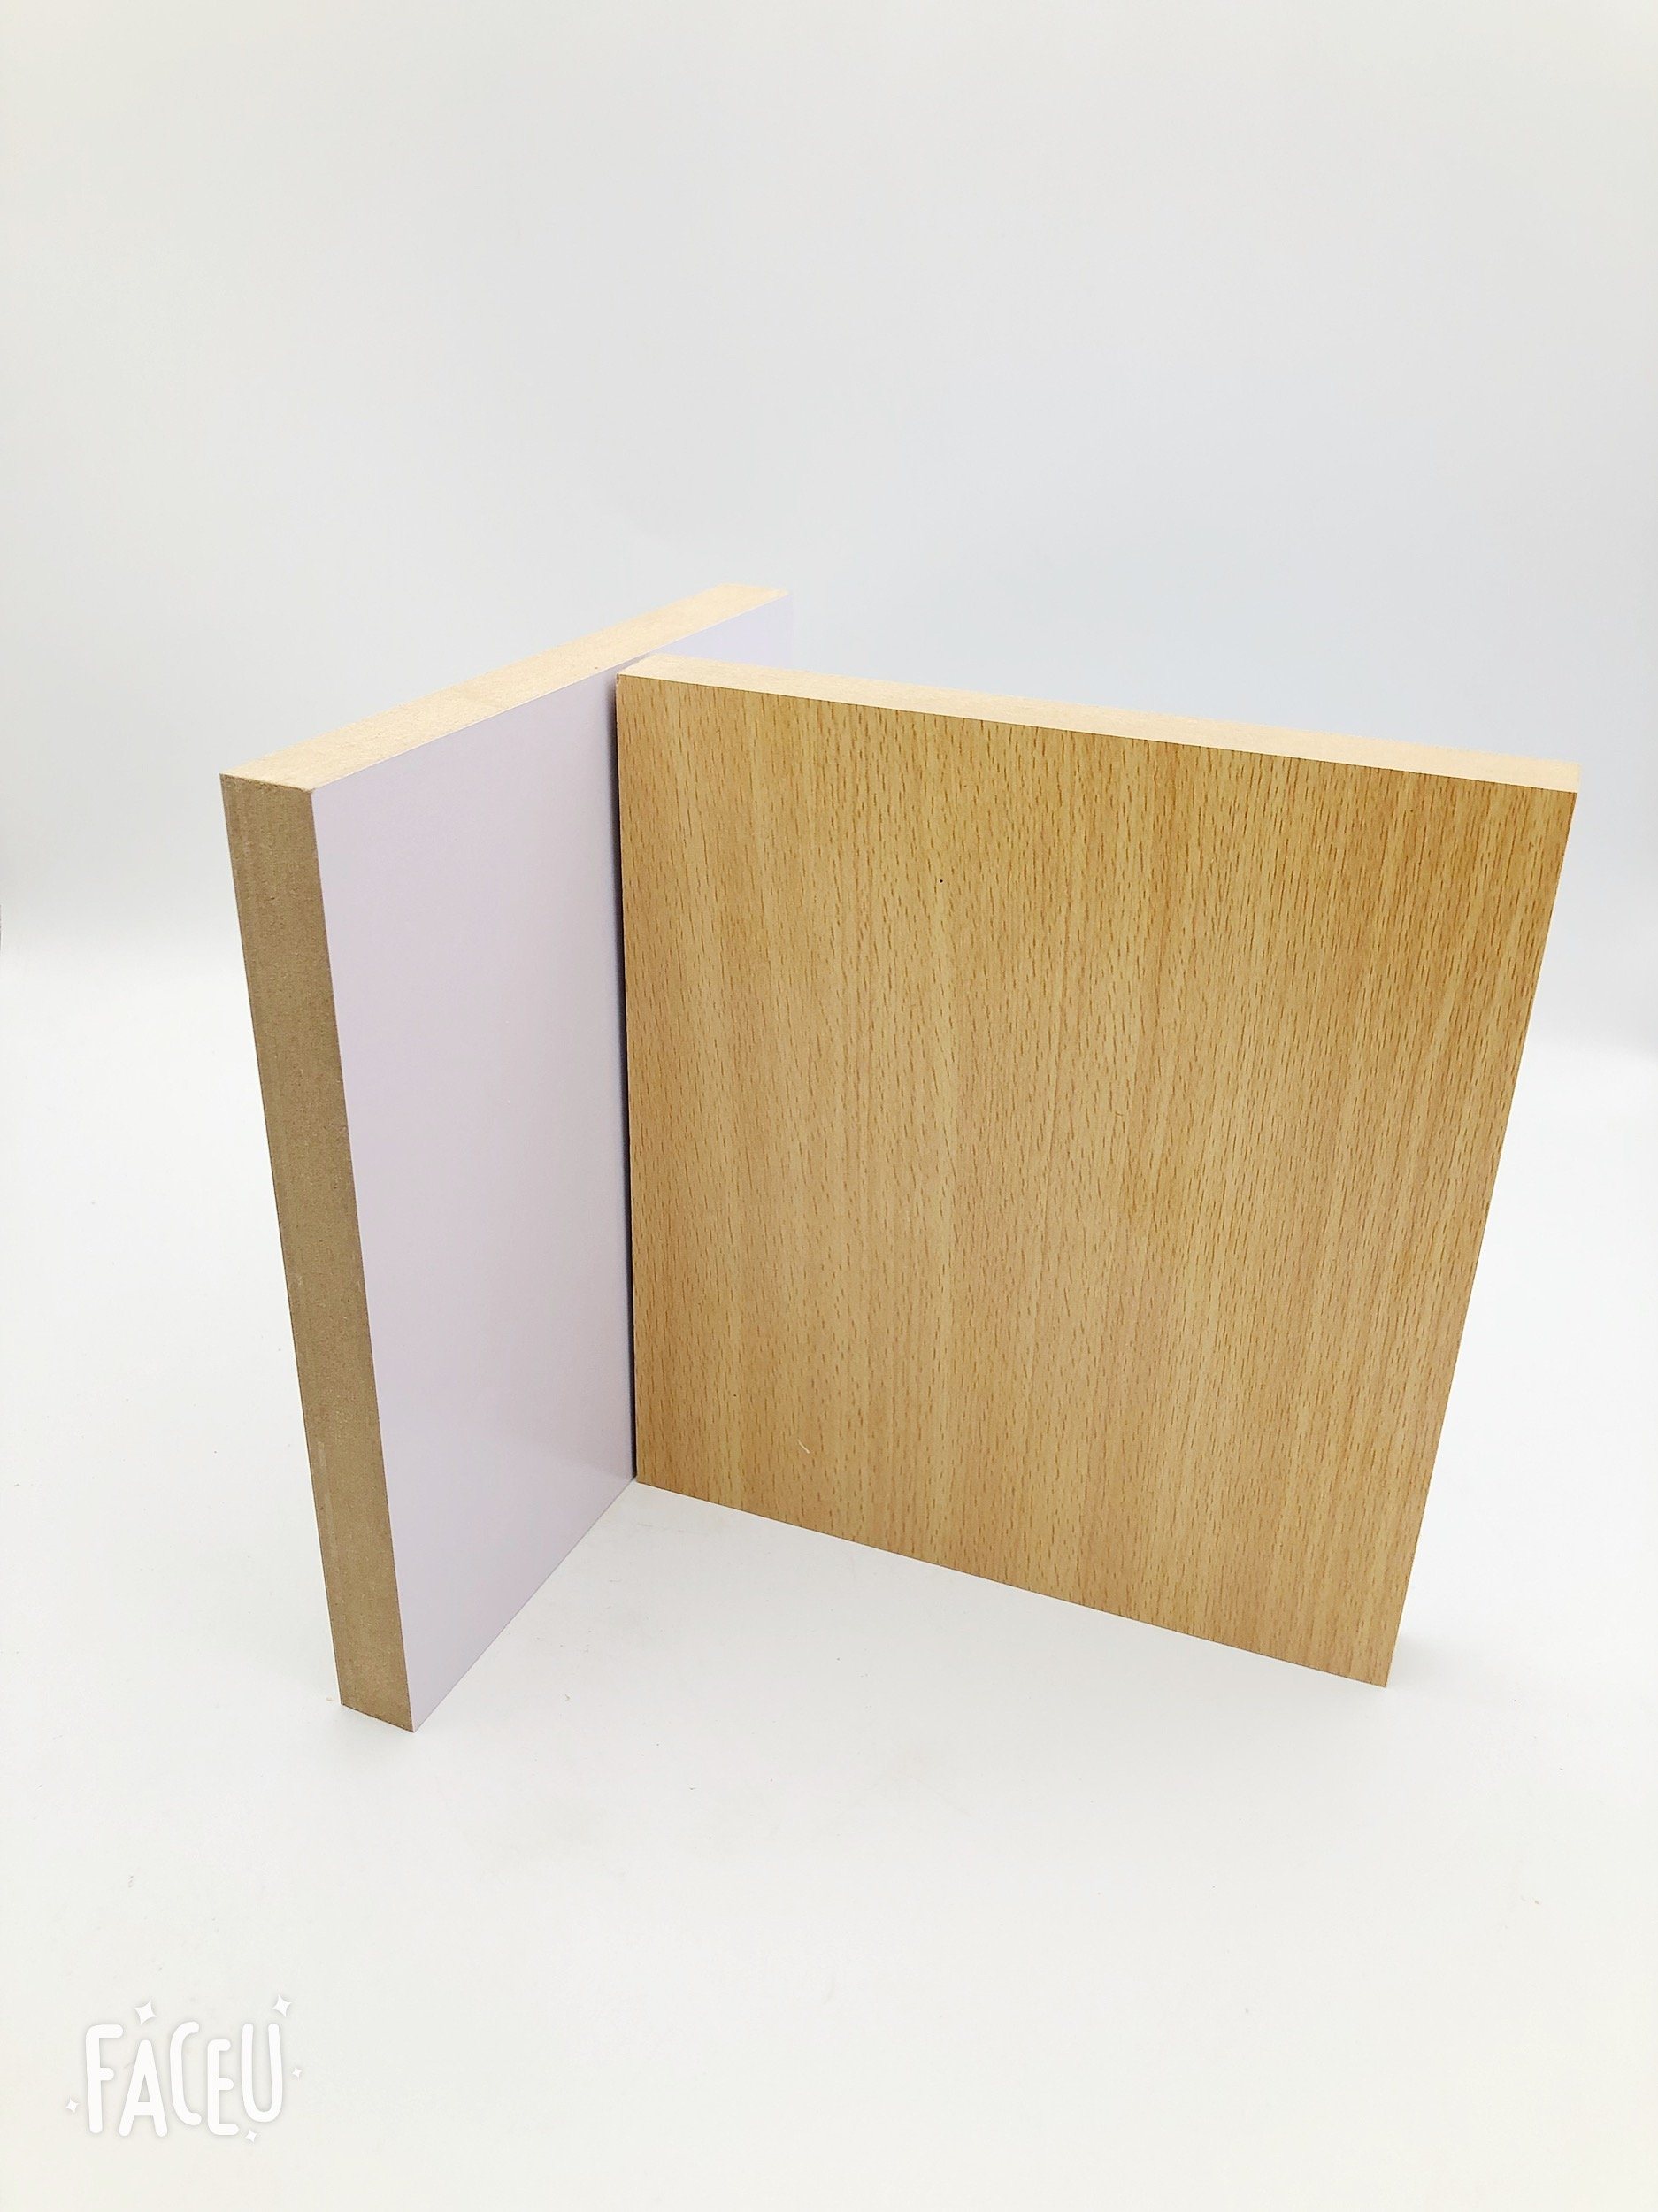 1830X2750 1220X2800 2100X2800 Large Size Melamine Filmed MDF Board for Furniture Decoration and Building Material